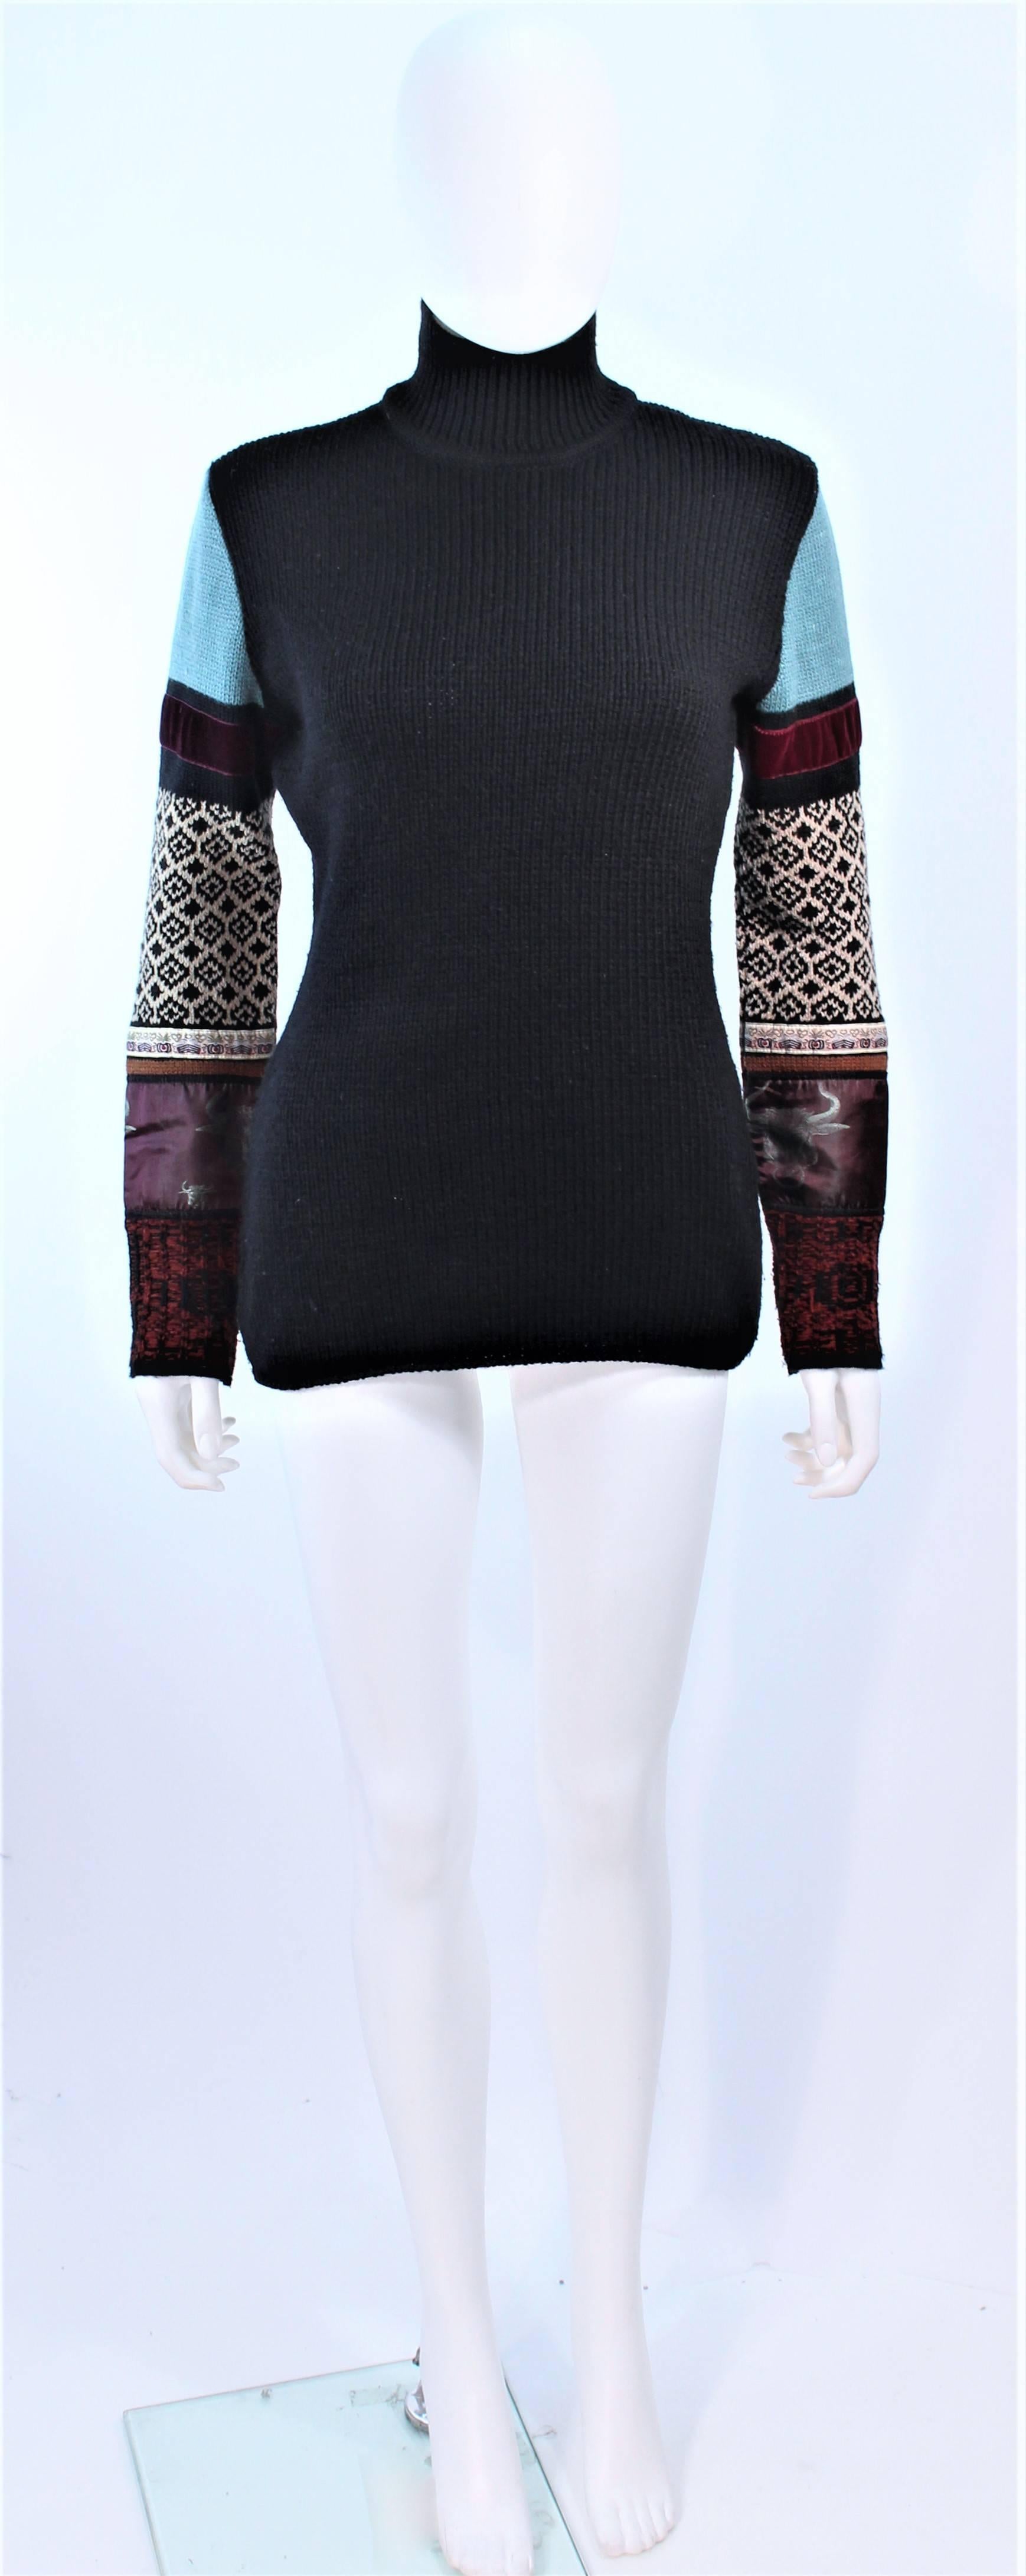 This Jean Paul Gaultier sweater is composed of a black knit with multi-applique and design. Features a turtleneck style. In excellent pre-owned condition.

**Please cross-reference measurements for personal accuracy. Size in description box is an